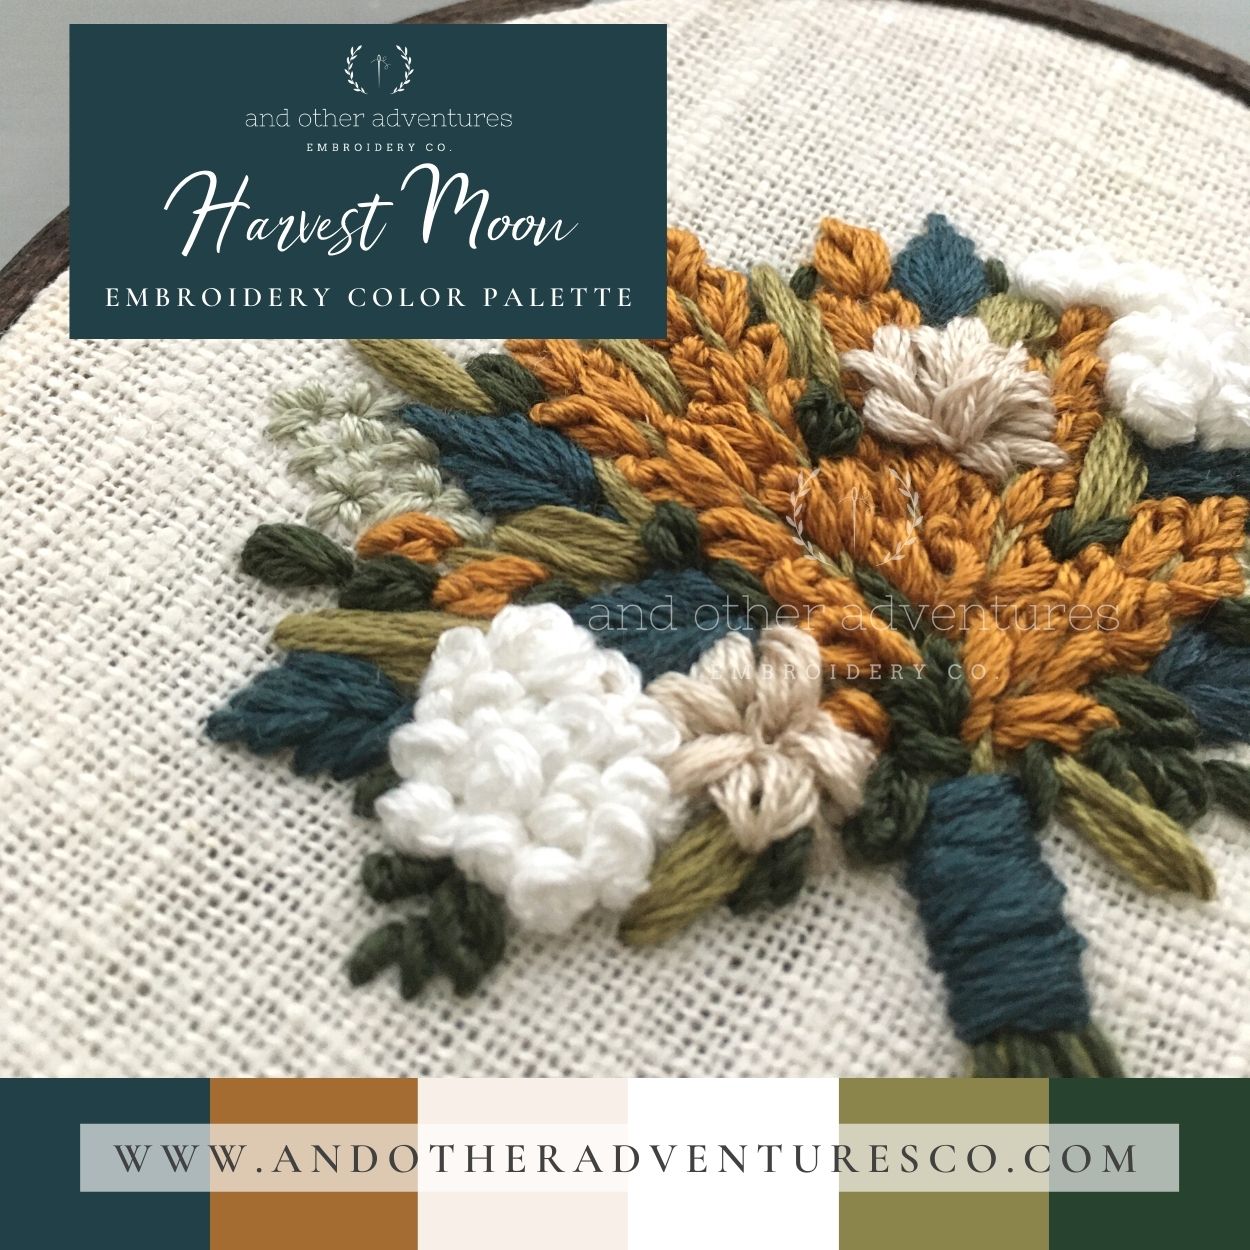 Harvest Moon Embroidery Color Palette | And Other Adventures Embroidery Co